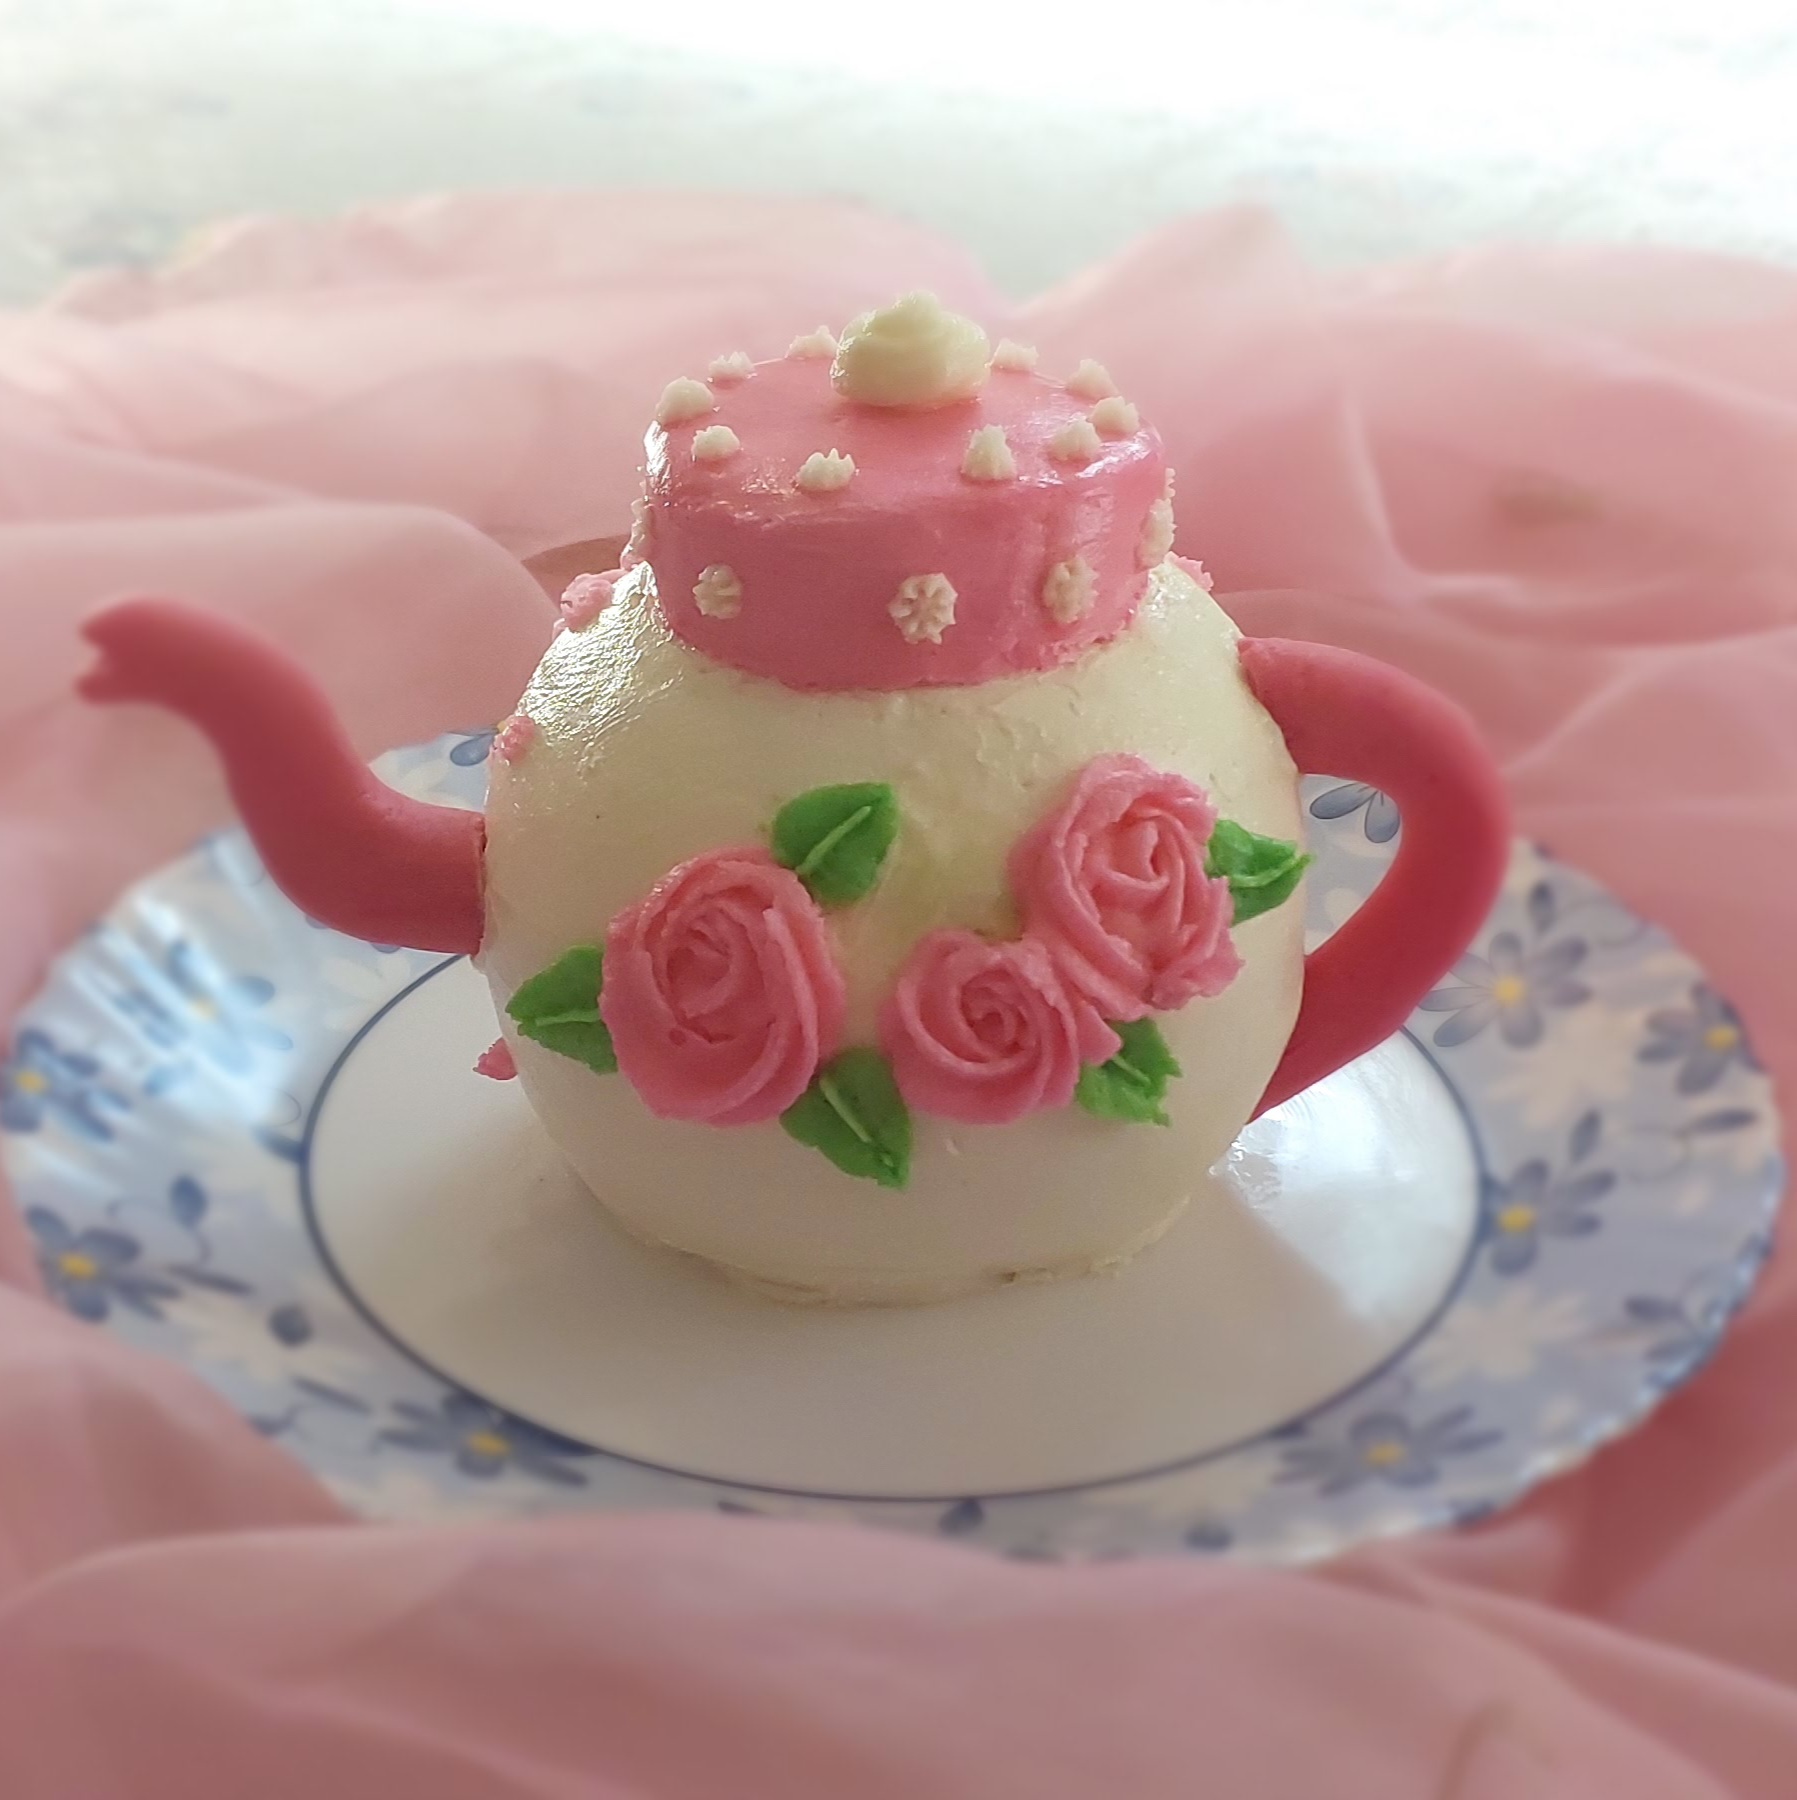 Free Teapot Cupcake Cake Template and Tutorial by Press Print Party!